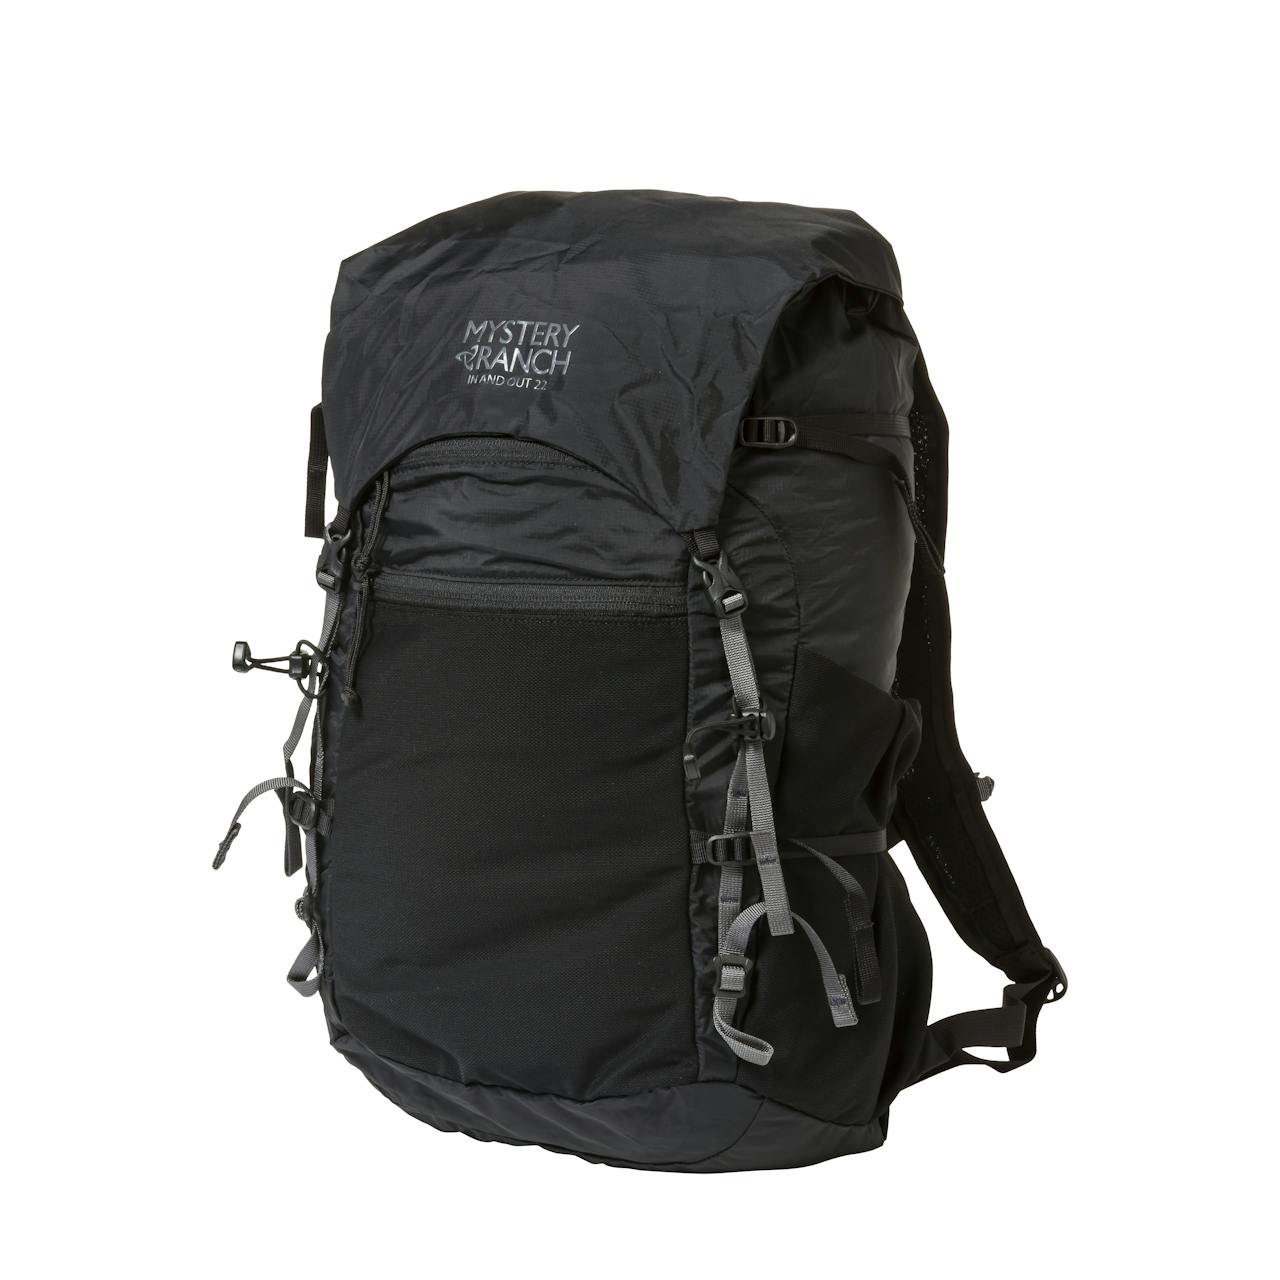 Mystery Ranch In & Out Packable Backpack - 22L